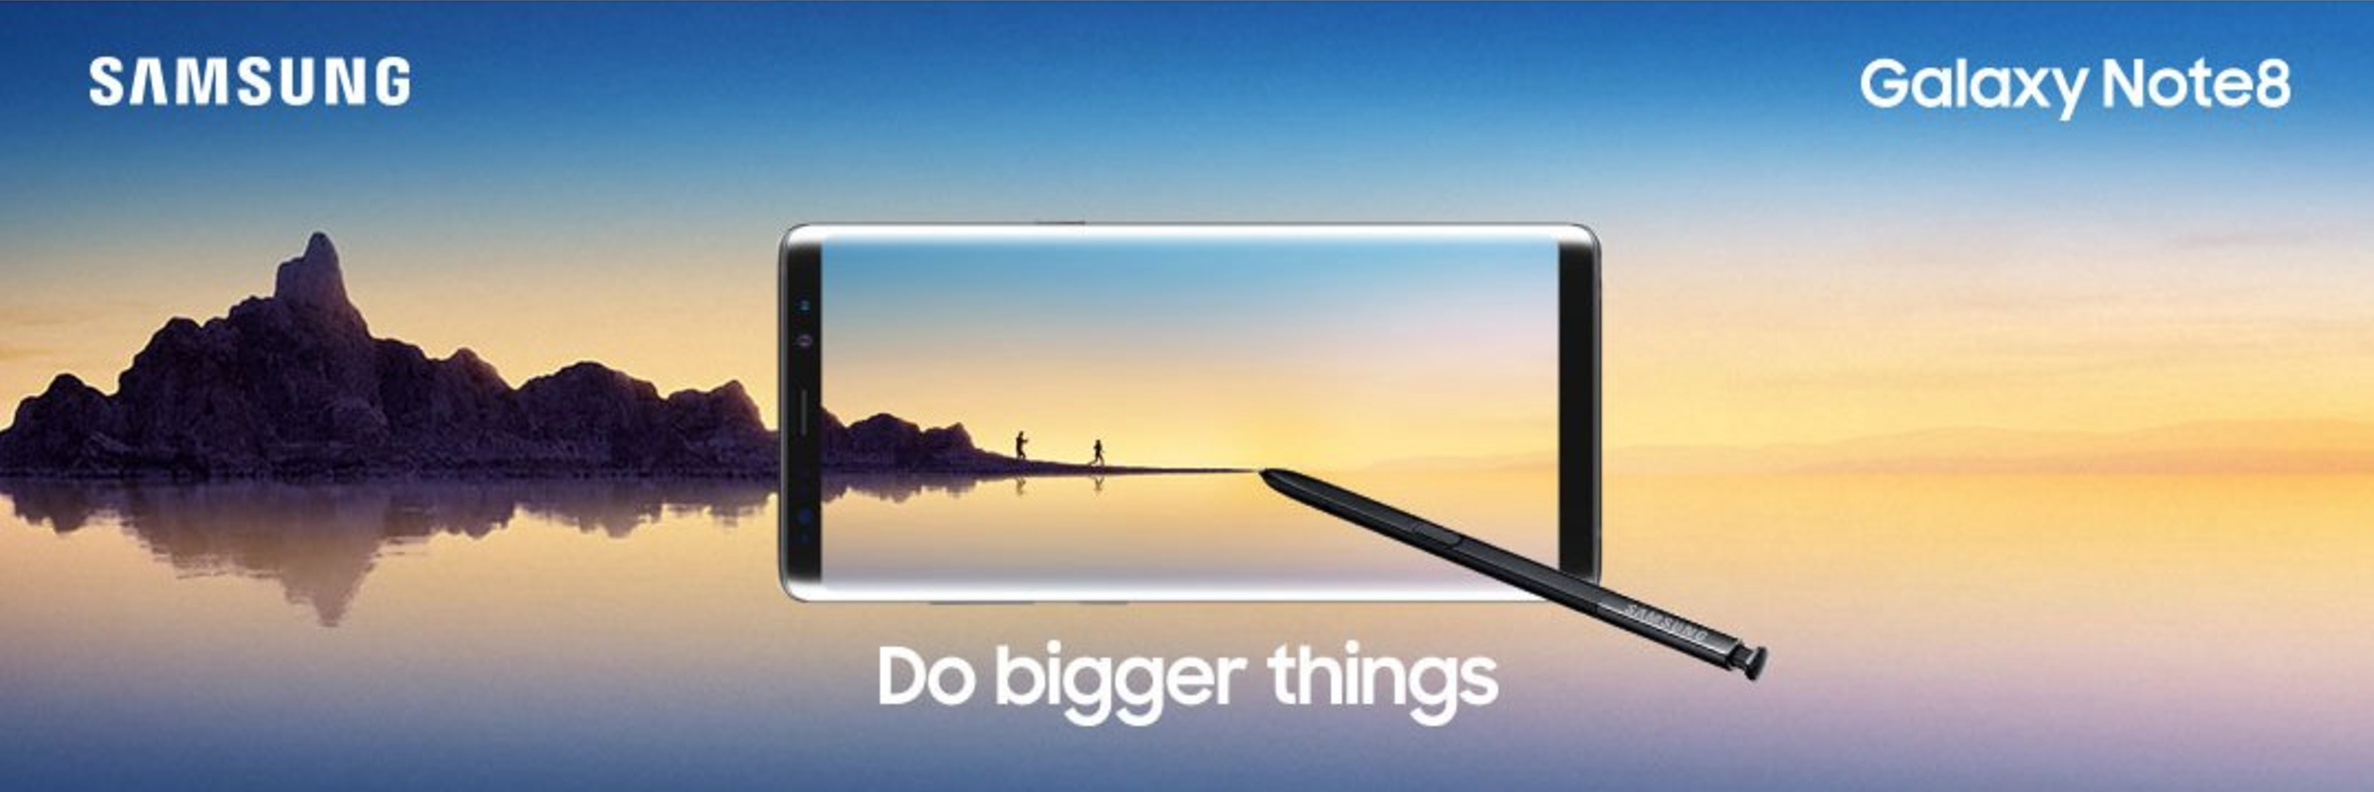 Download 13 of the Samsung Galaxy Note 8 wallpapers right now - Ausdroid